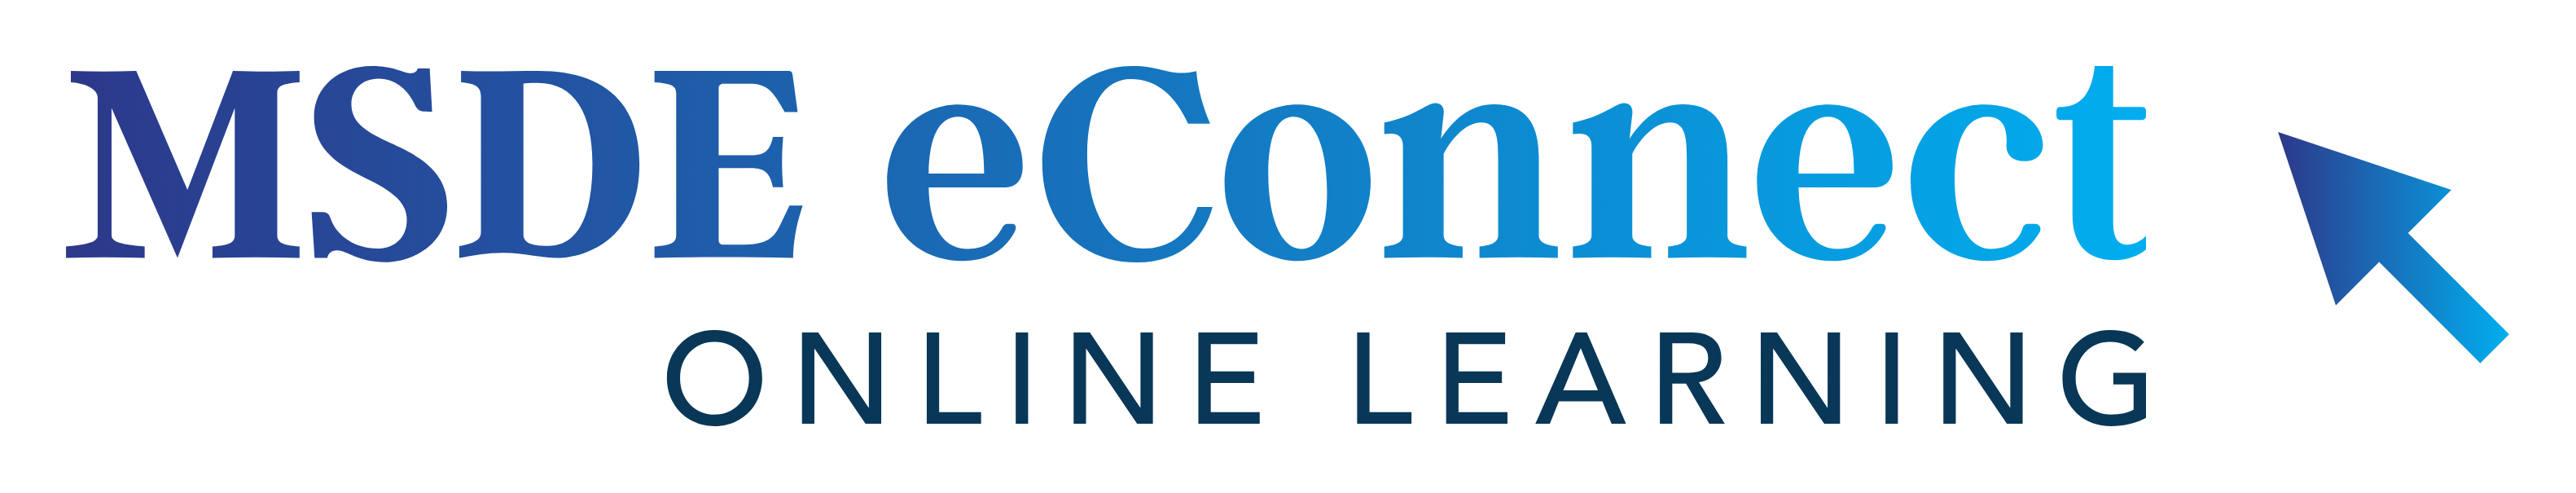 MSDE eConnect Online Learning